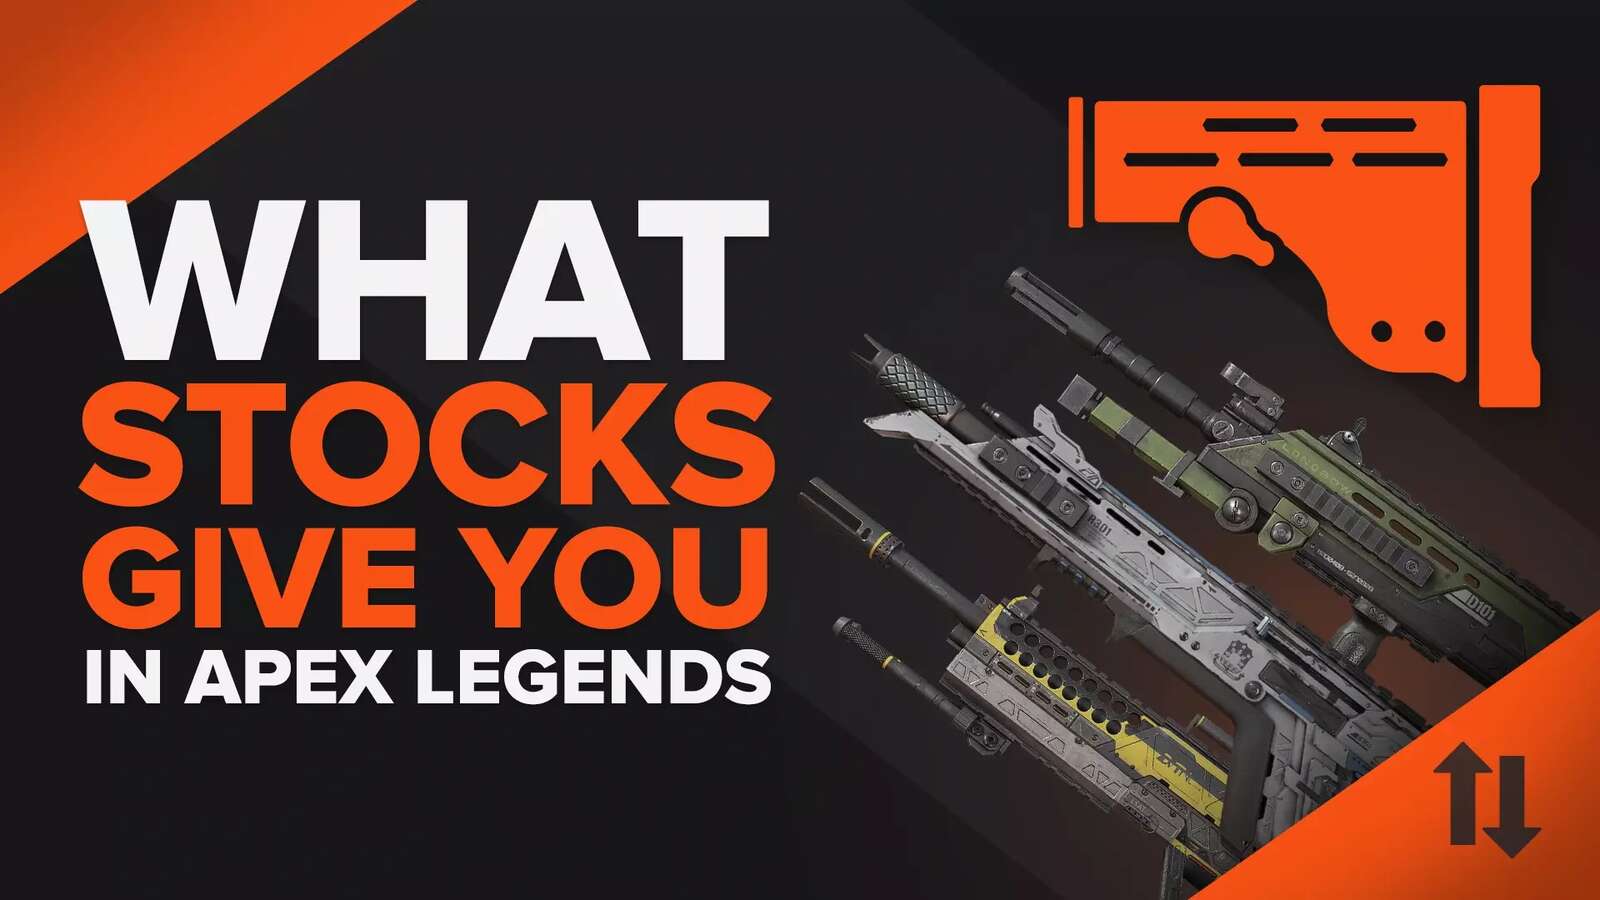 What Does a Stock Do In Apex Legends Exactly?